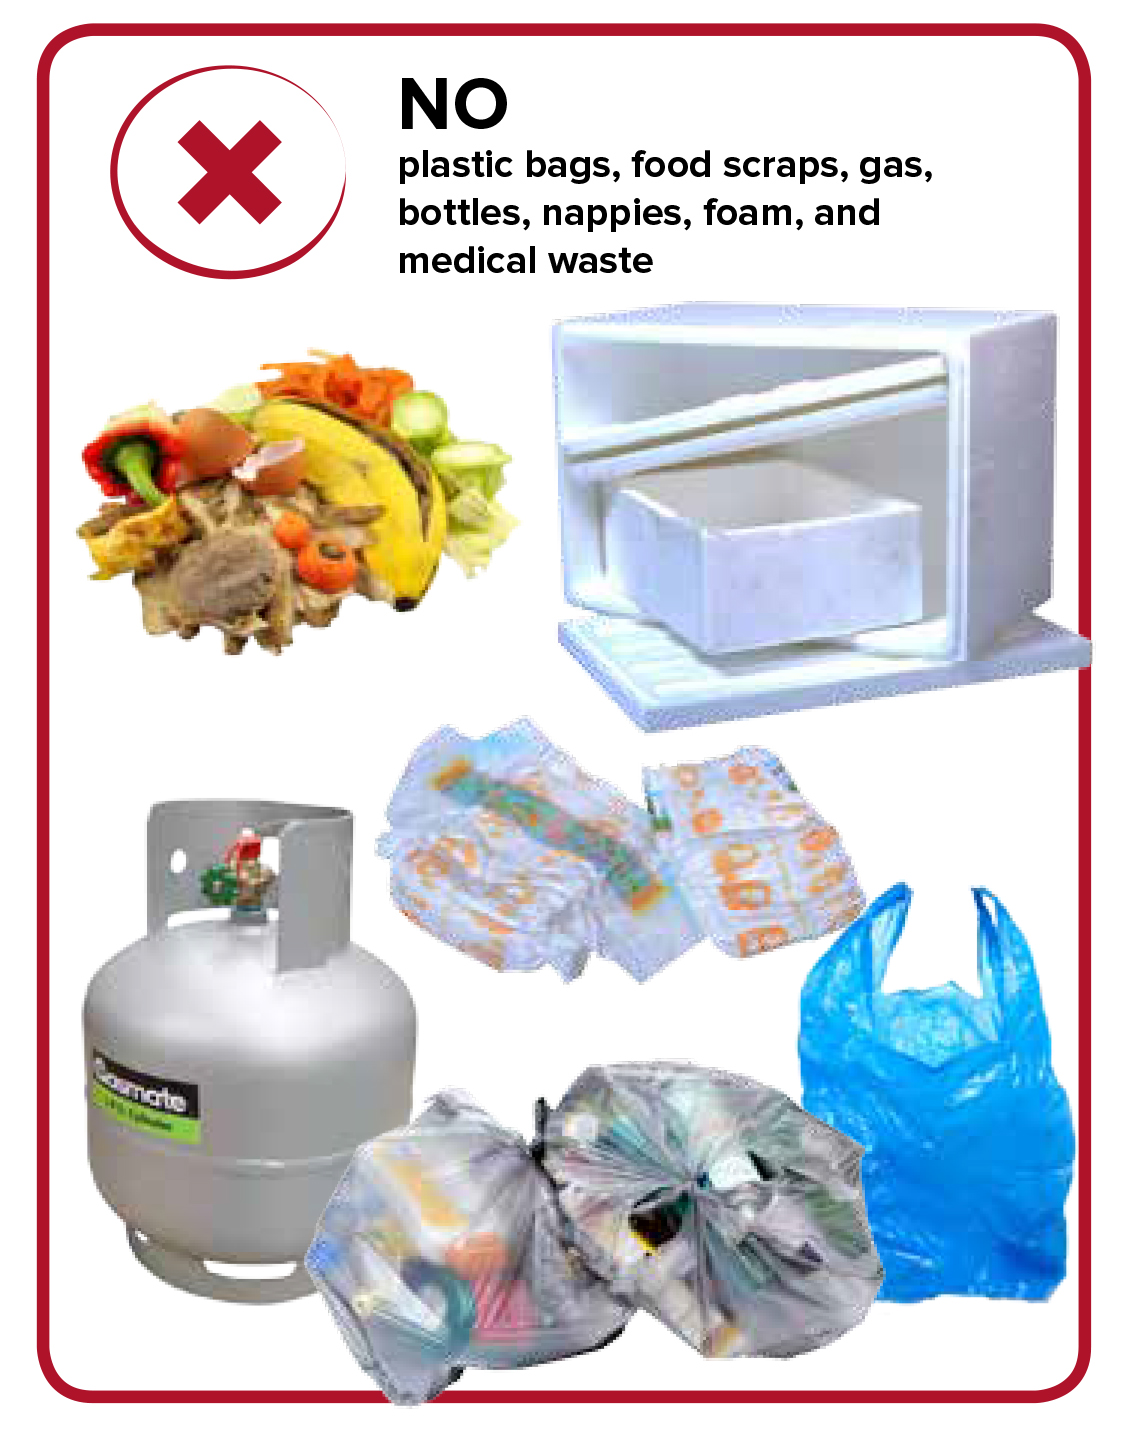 City of Parramatta Recycling Items Non Permitted